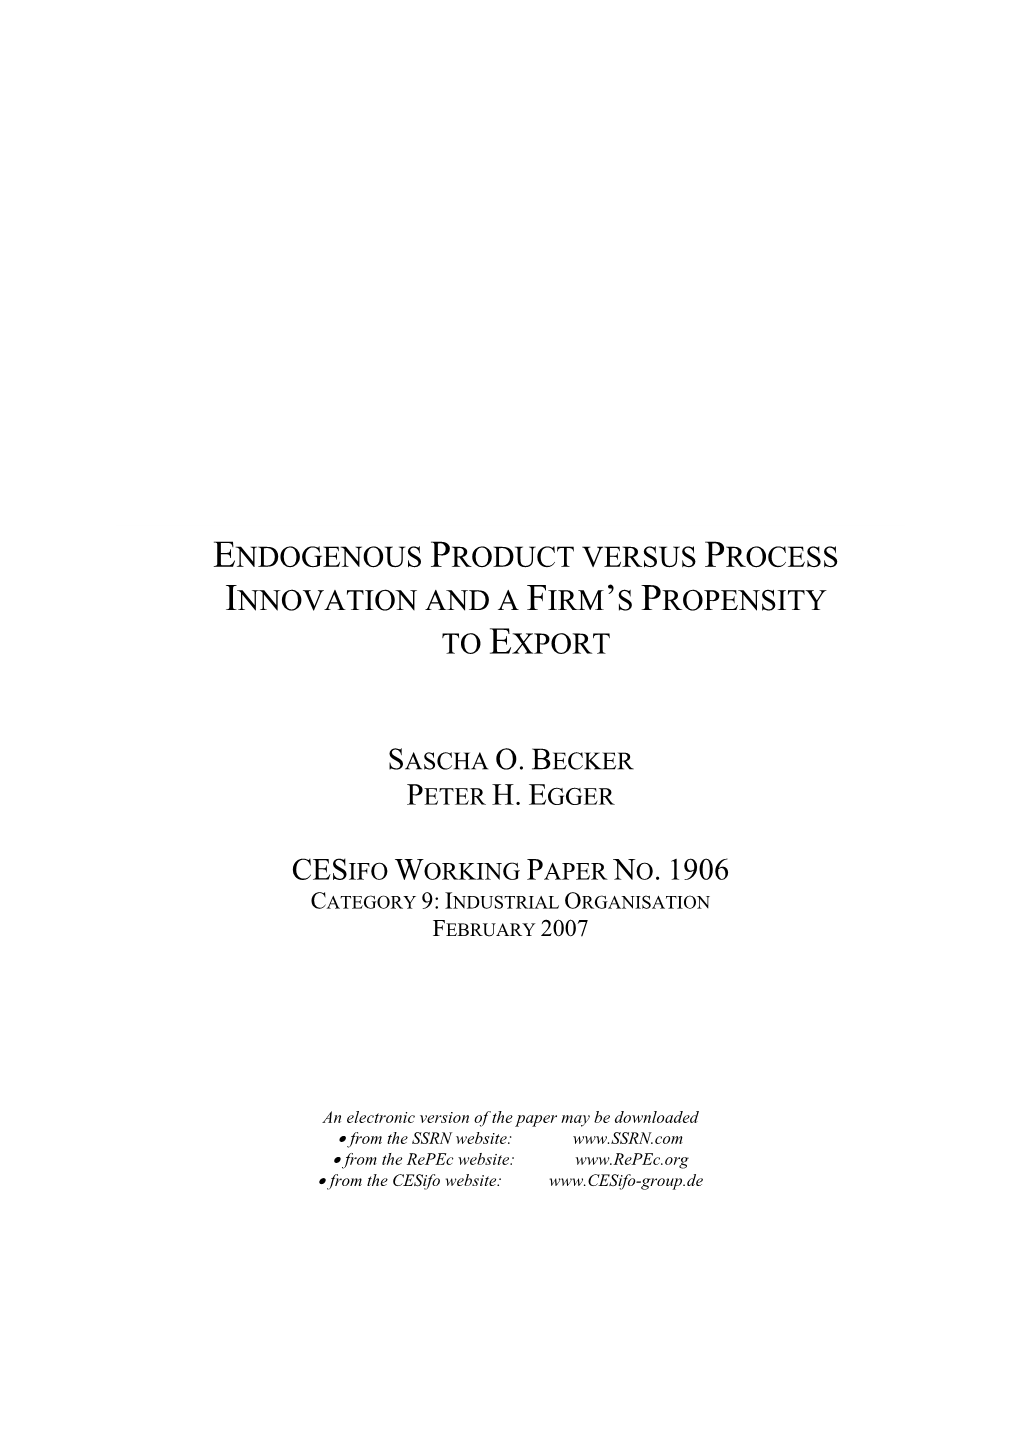 Endogenous Product Versus Process Innovation and a Firm's Propensity to Export